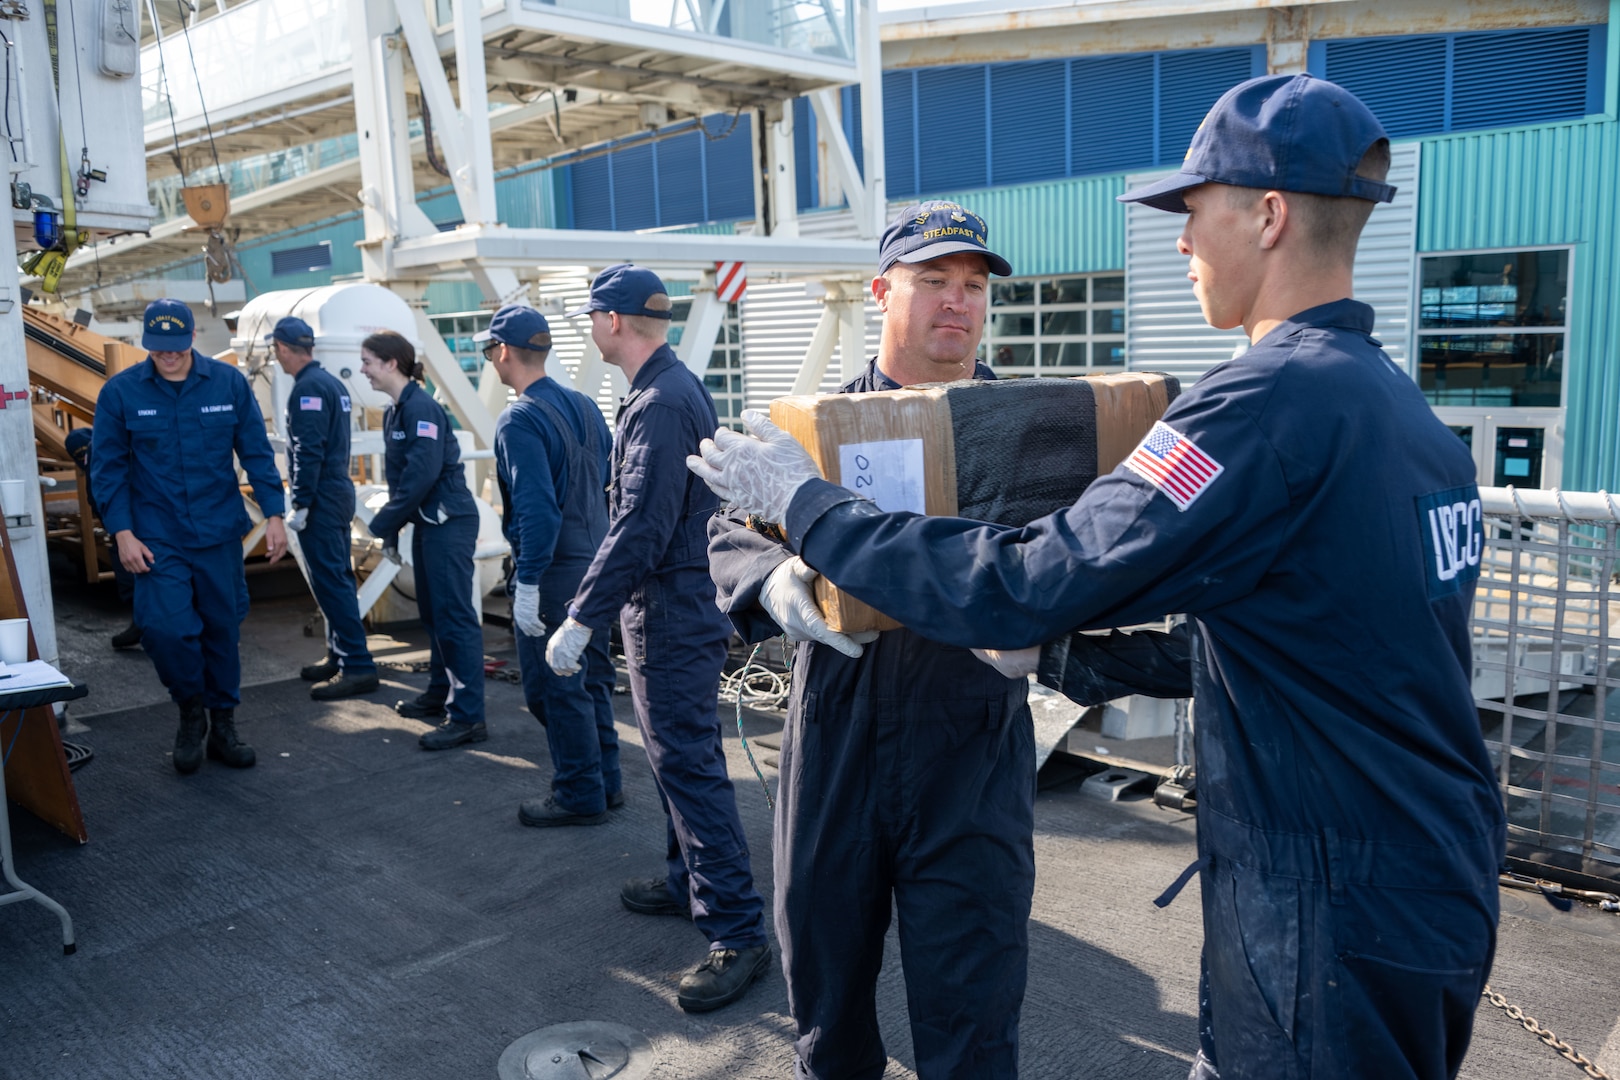 Coast Guard members stack illegal, interdicted drugs on the deck of the cutter in San Diego.